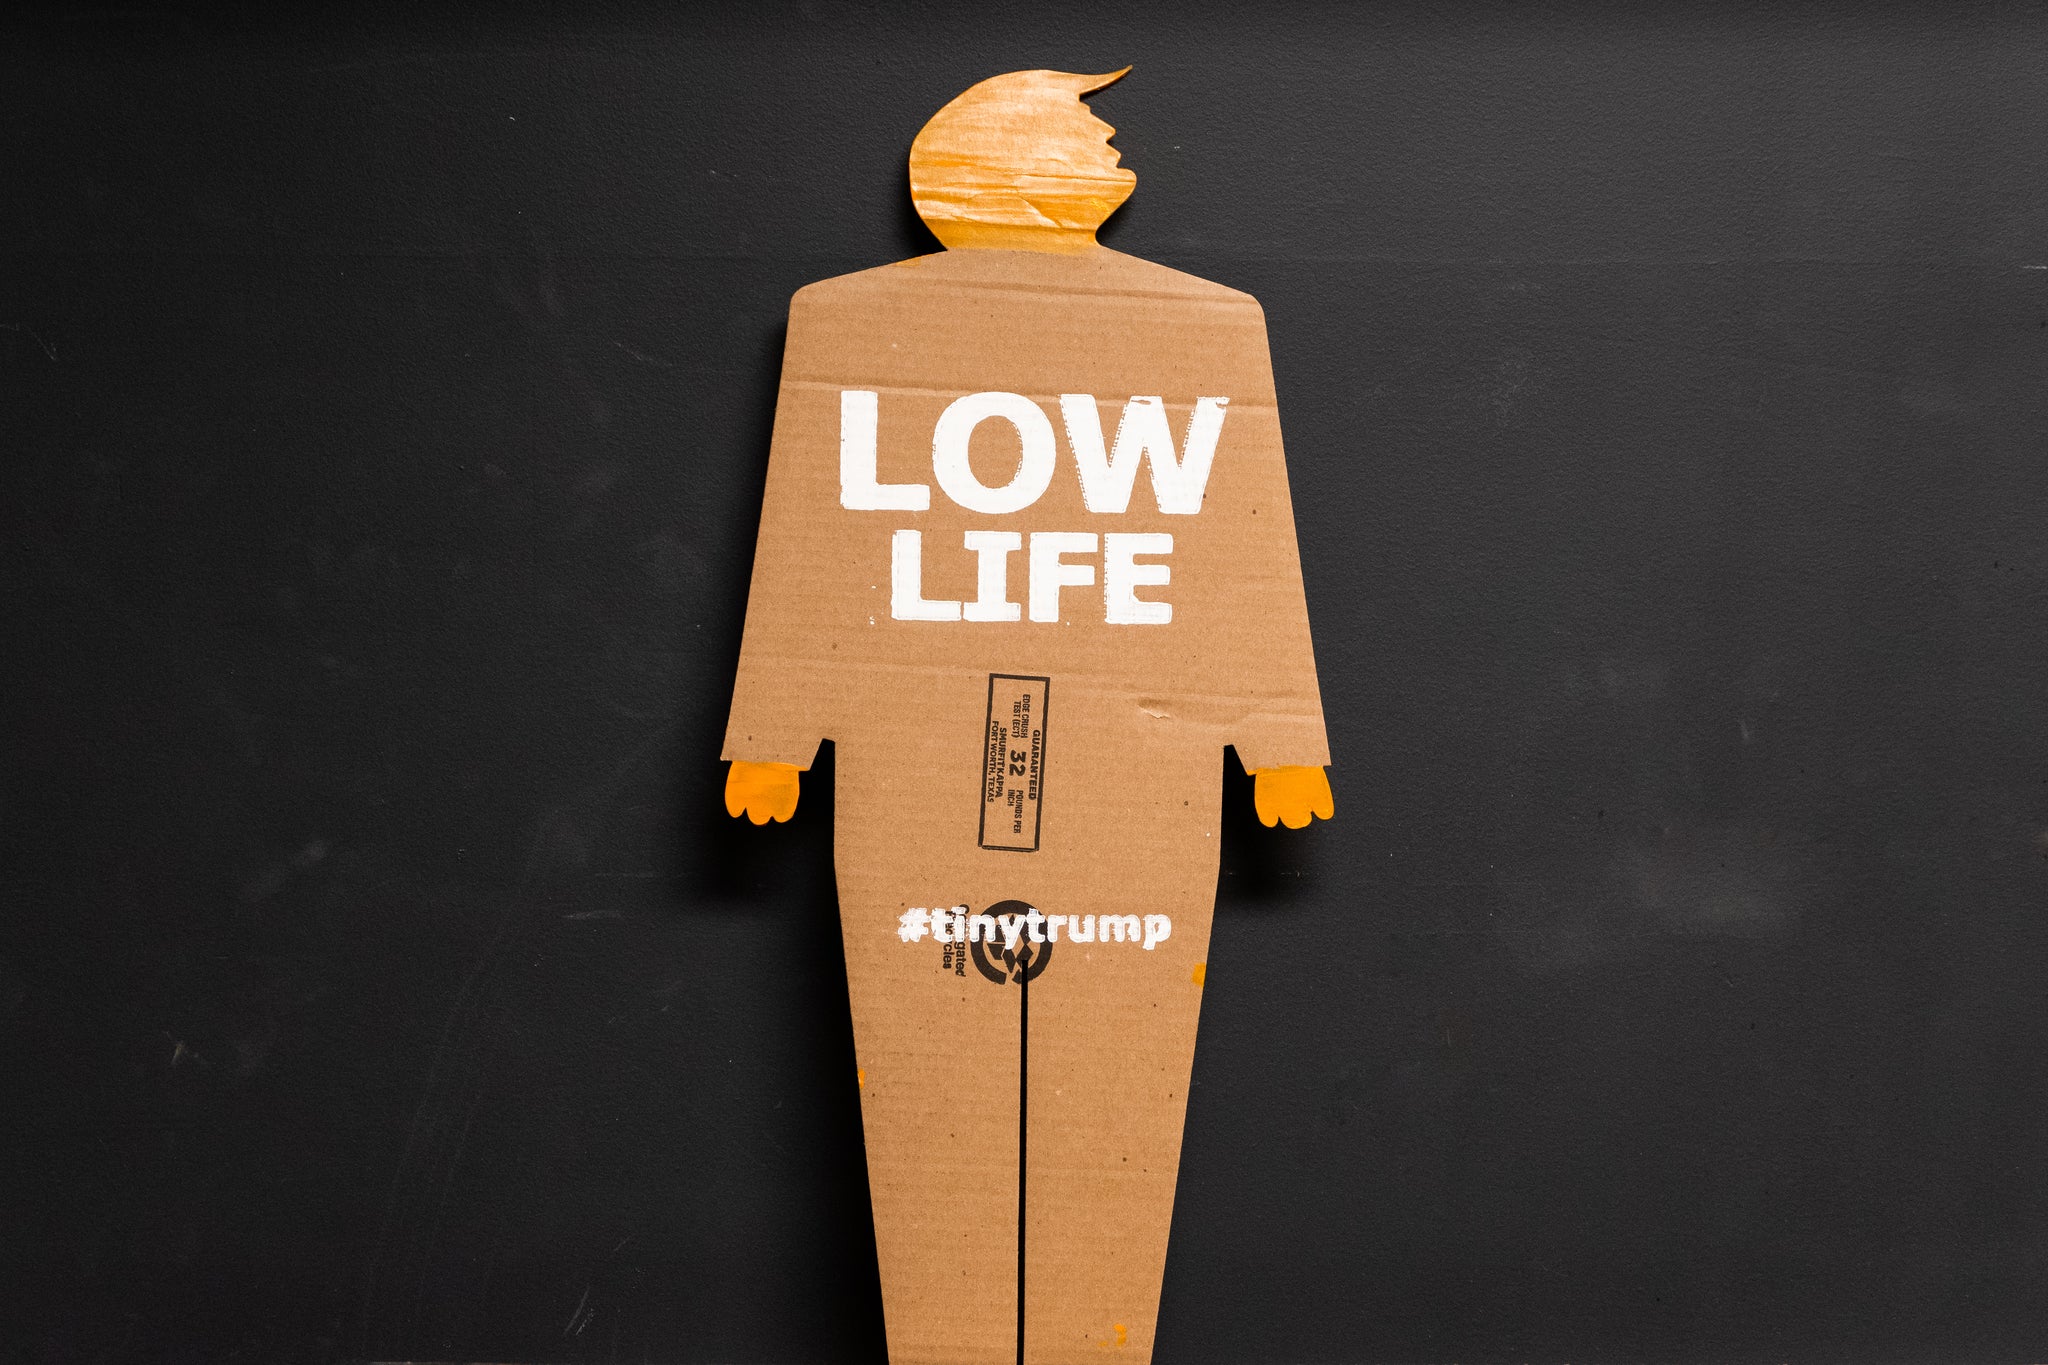 A two foot tall, cardboard tiny trump with the slogan "Low Life"